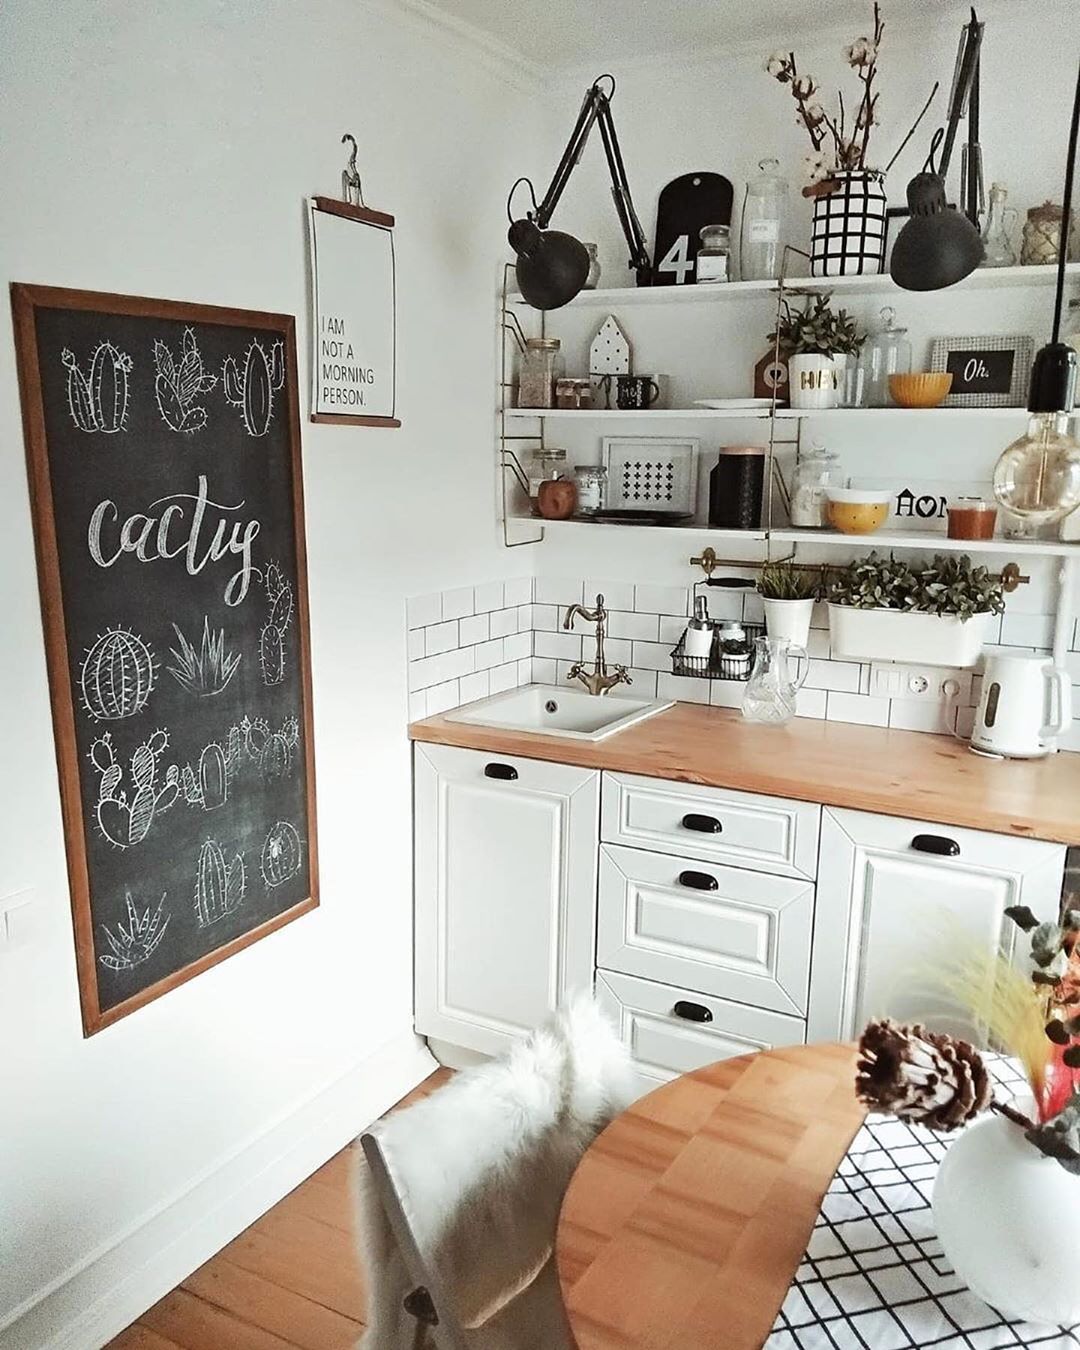 20-small-kitchen-ideas-ideas-to-open-your-compact-room-2019